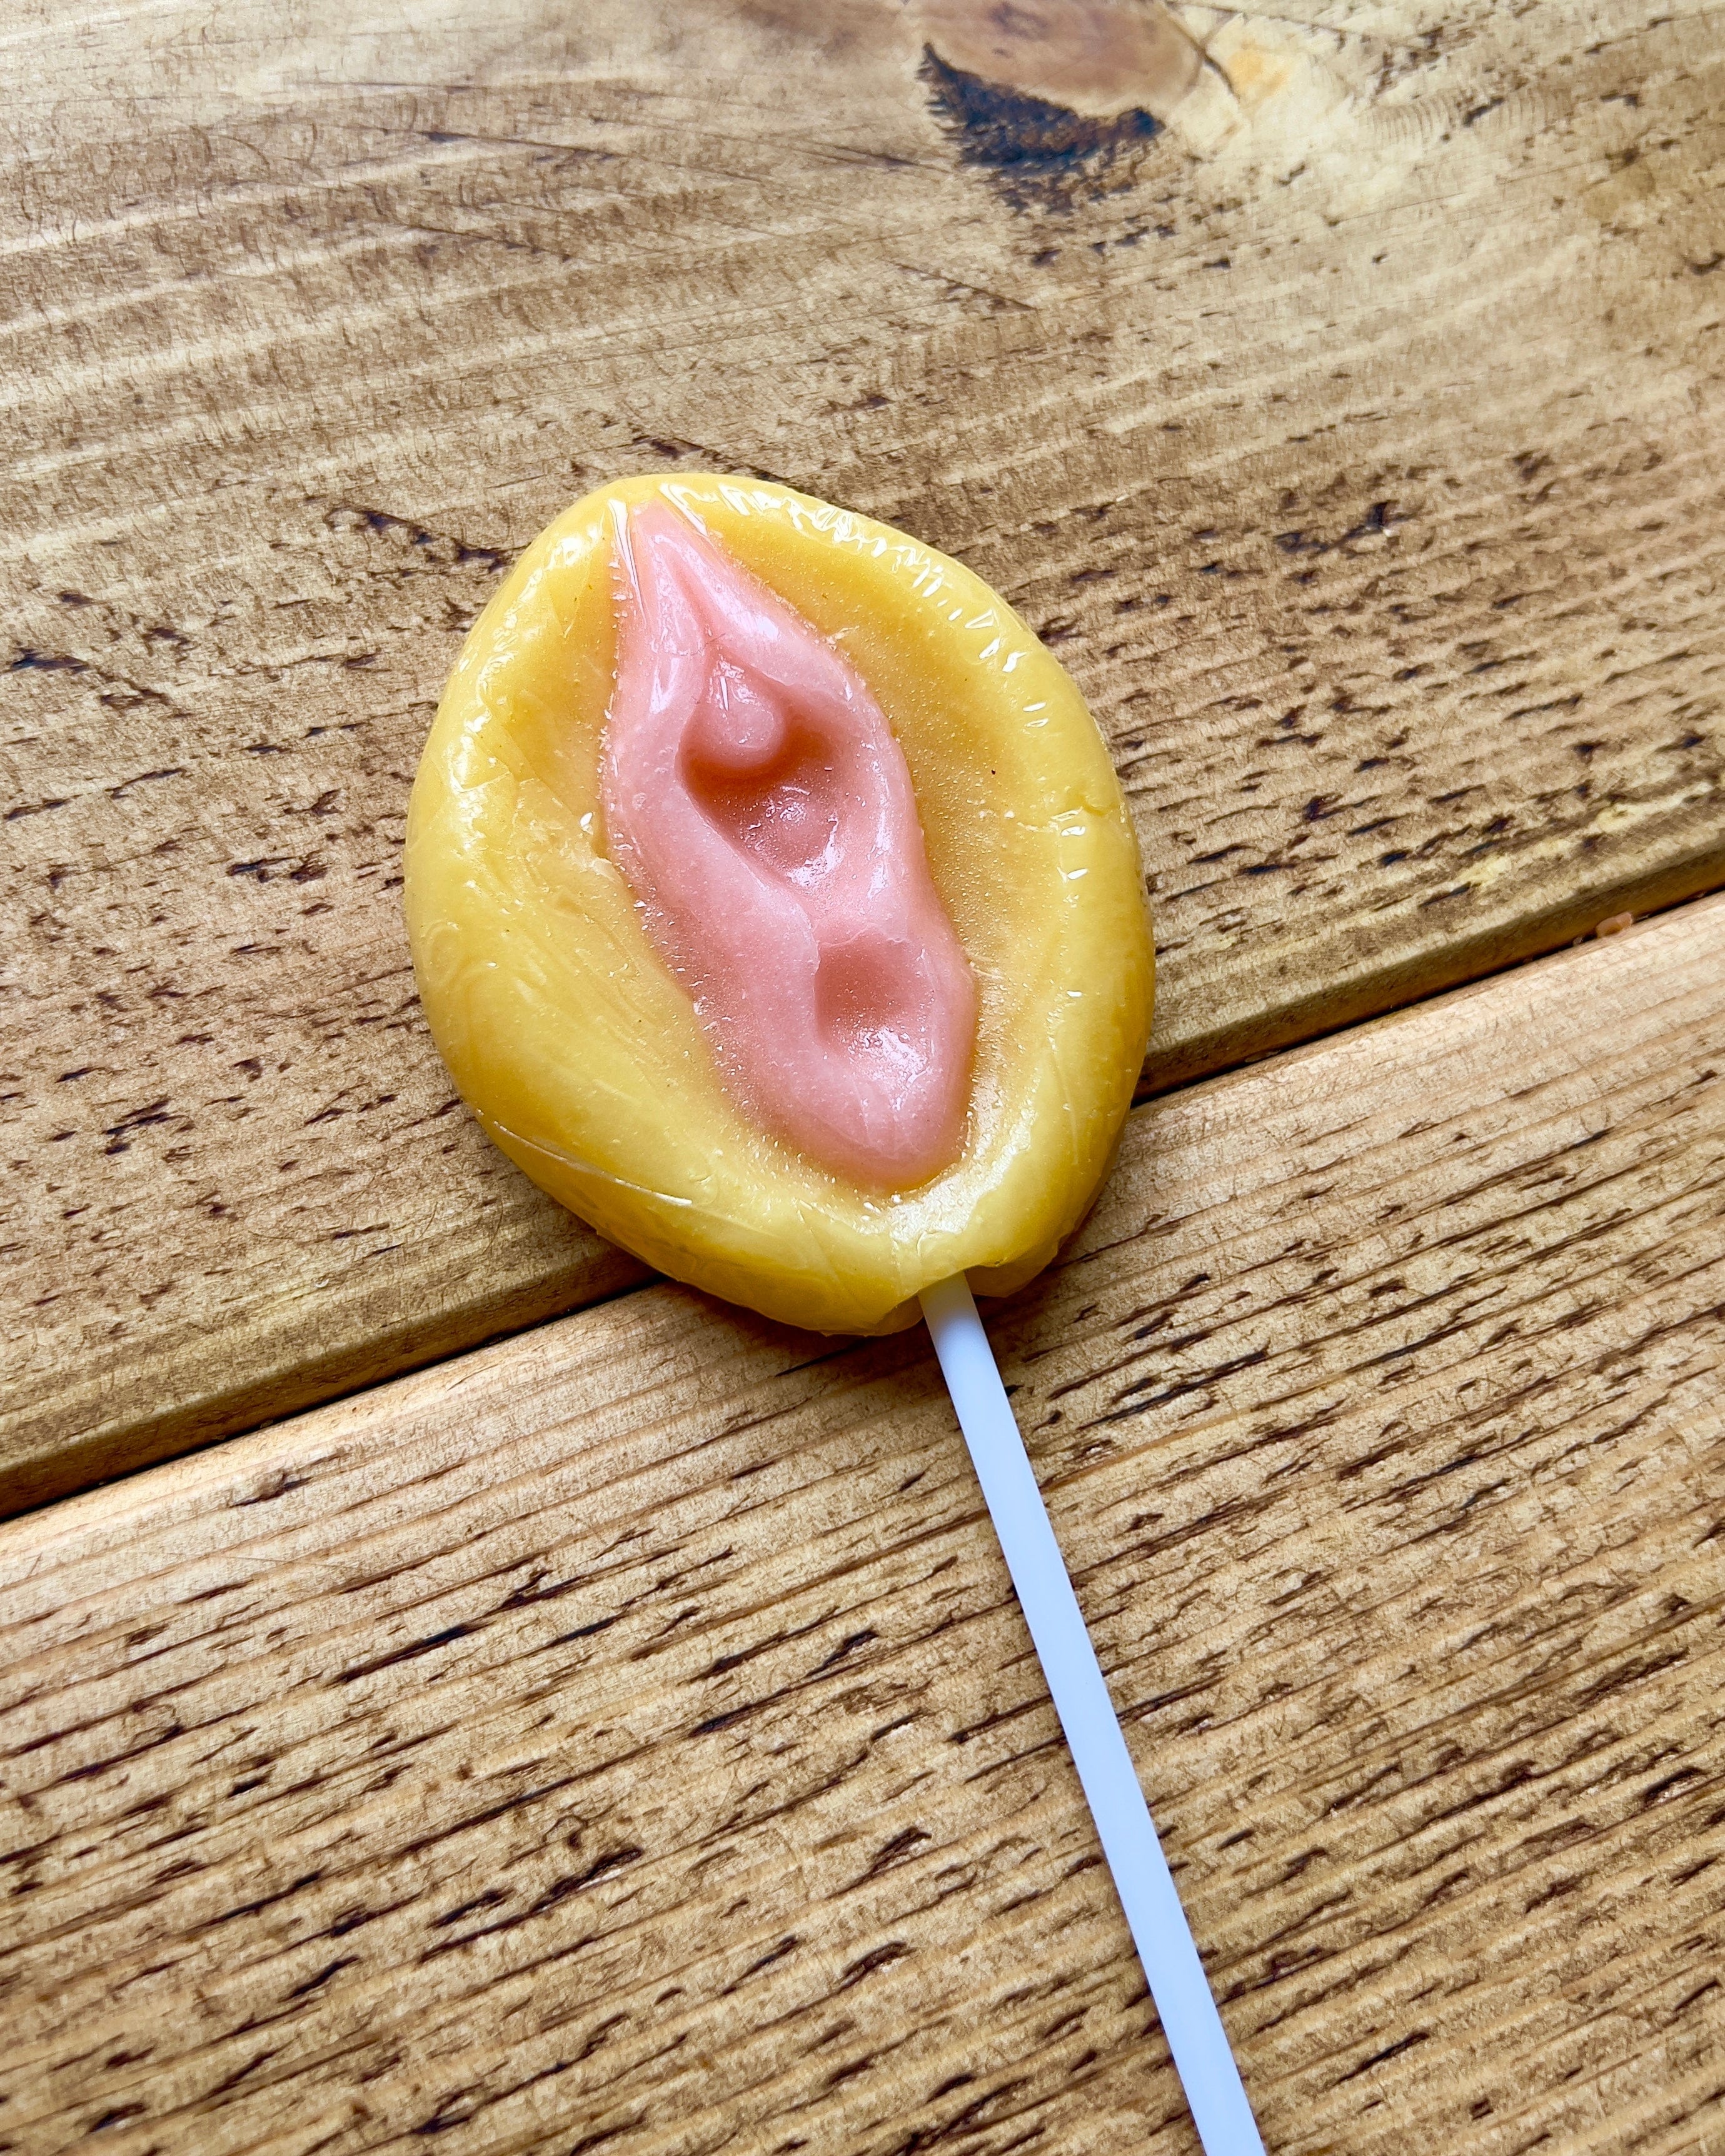 Do you like eating pussy? Well if you do, then you might just like this edible candy pussy.